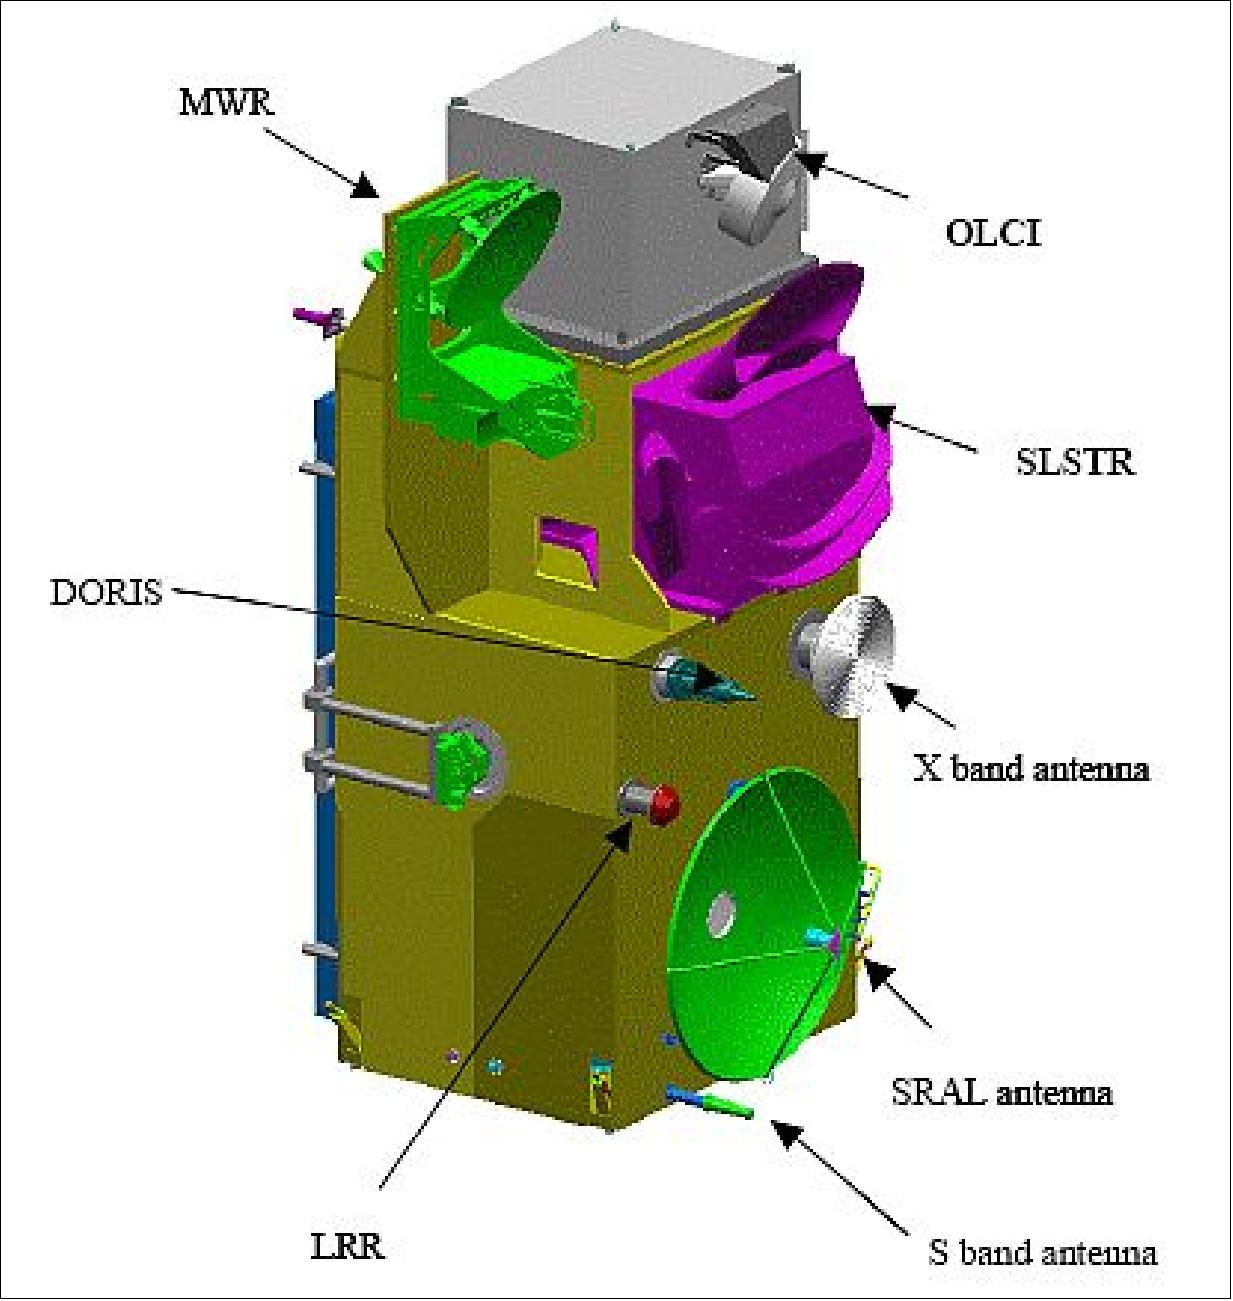 Figure 59: Sentinel-3 spacecraft with payload layout (image credit: ESA)